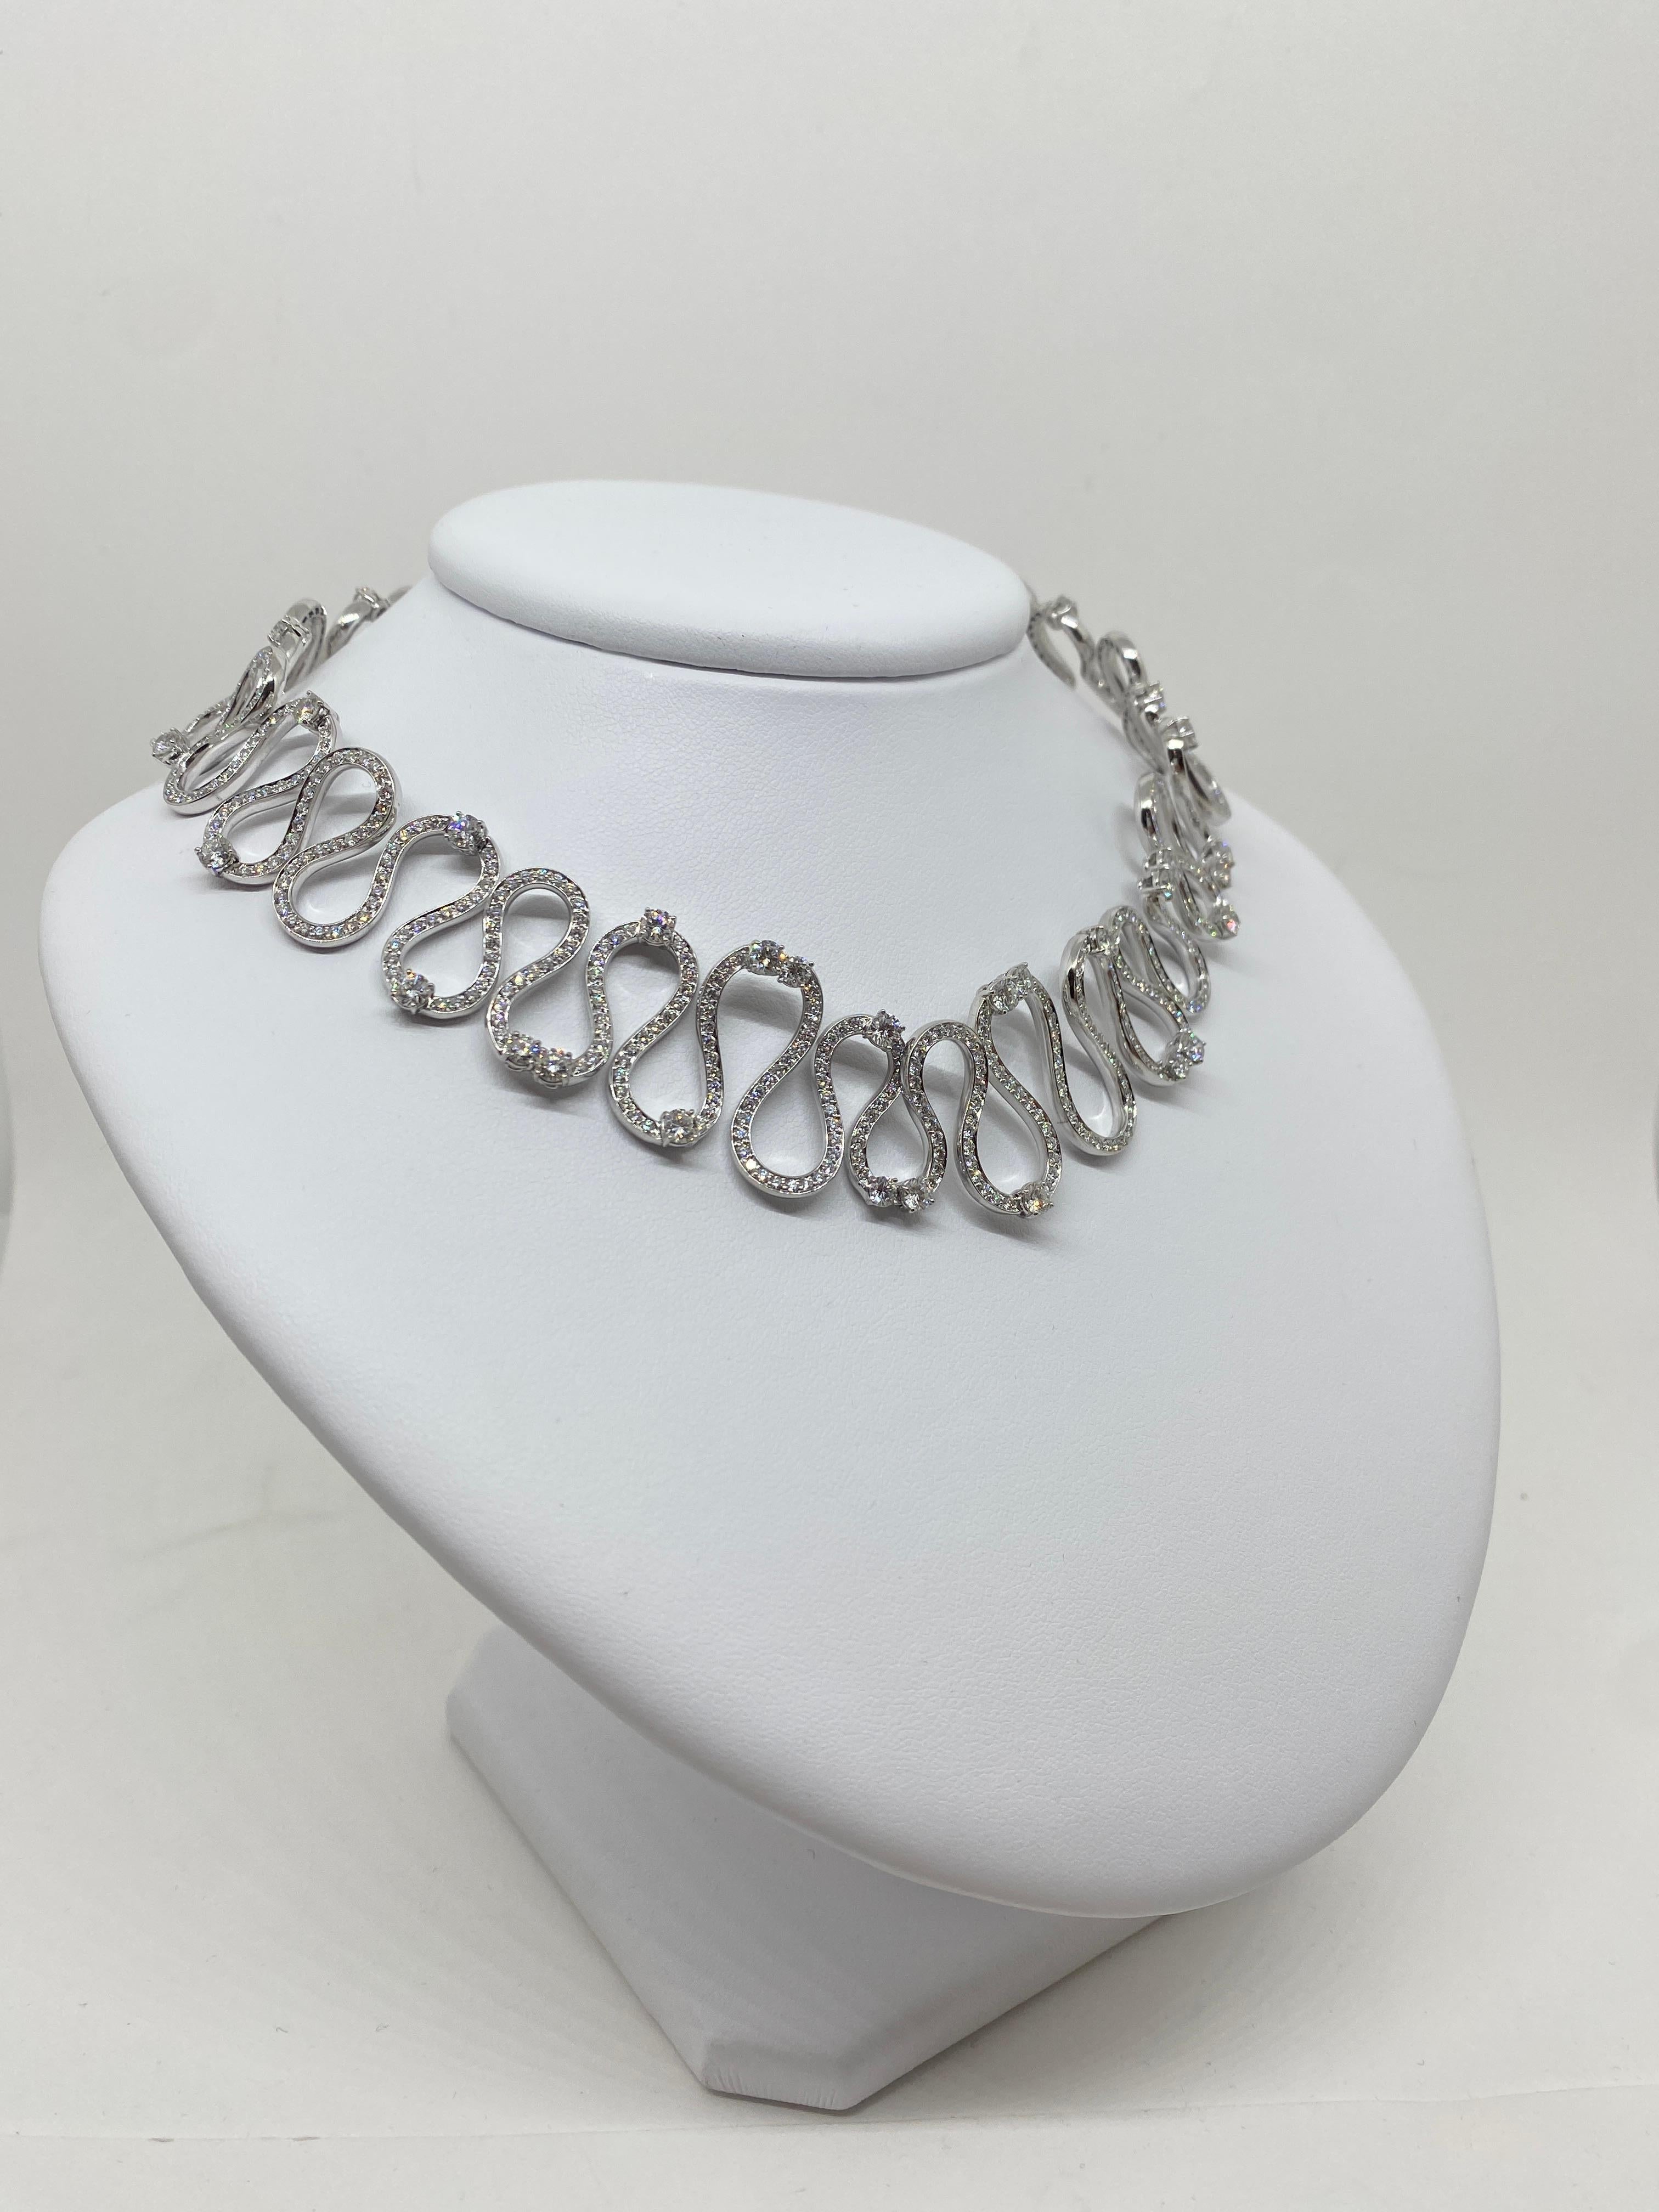 Brilliant Cut One of a Kind 18 Kt White Gold Cantamessa Queen Necklace 15.64 Ct White Diamonds For Sale